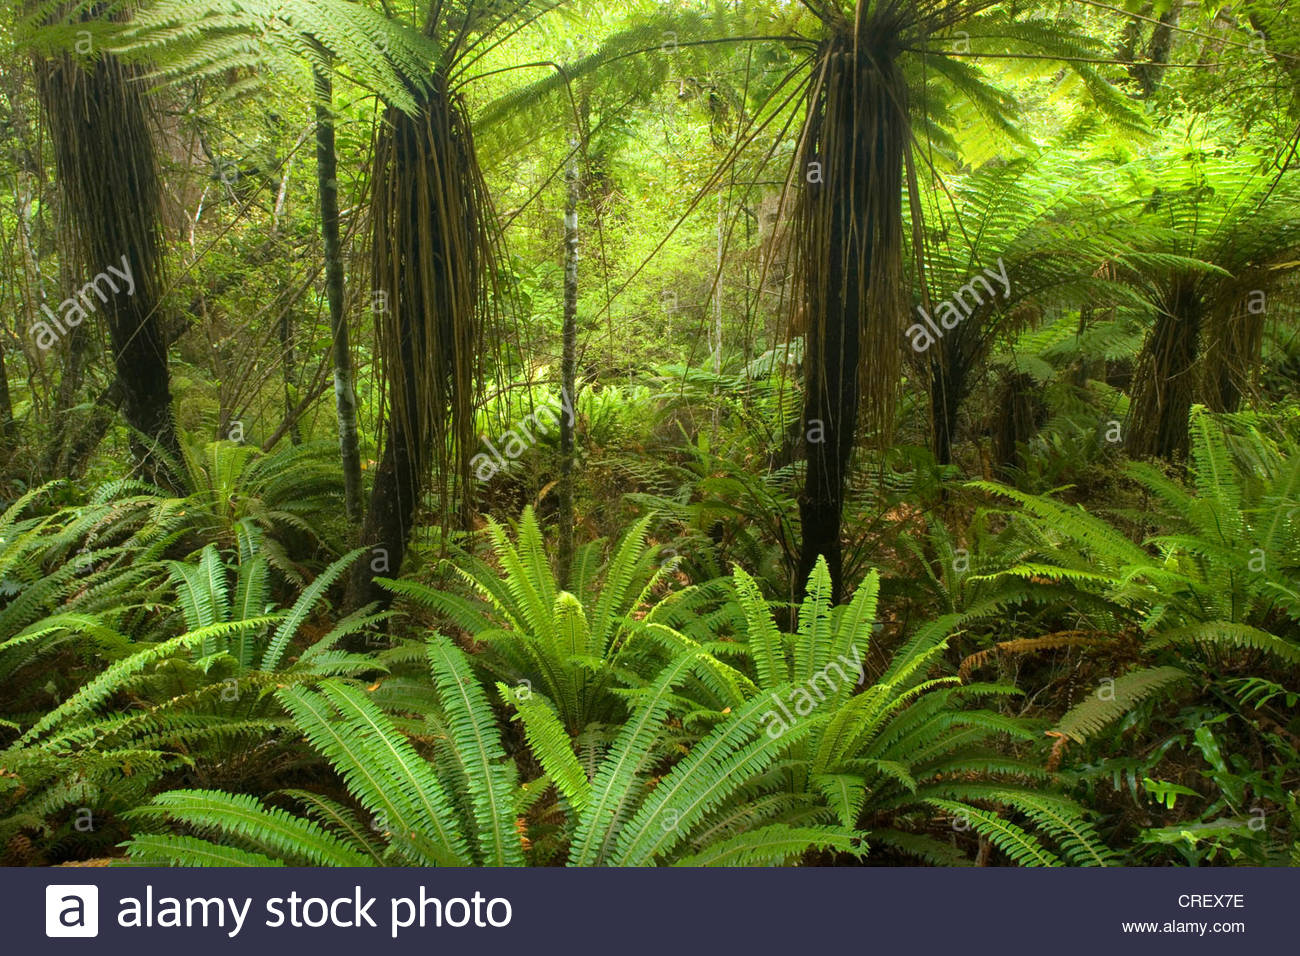 pristine-rainforest-with-many-tree-fern-and-lush-moss-and-lichen-covered-CREX7E.jpg